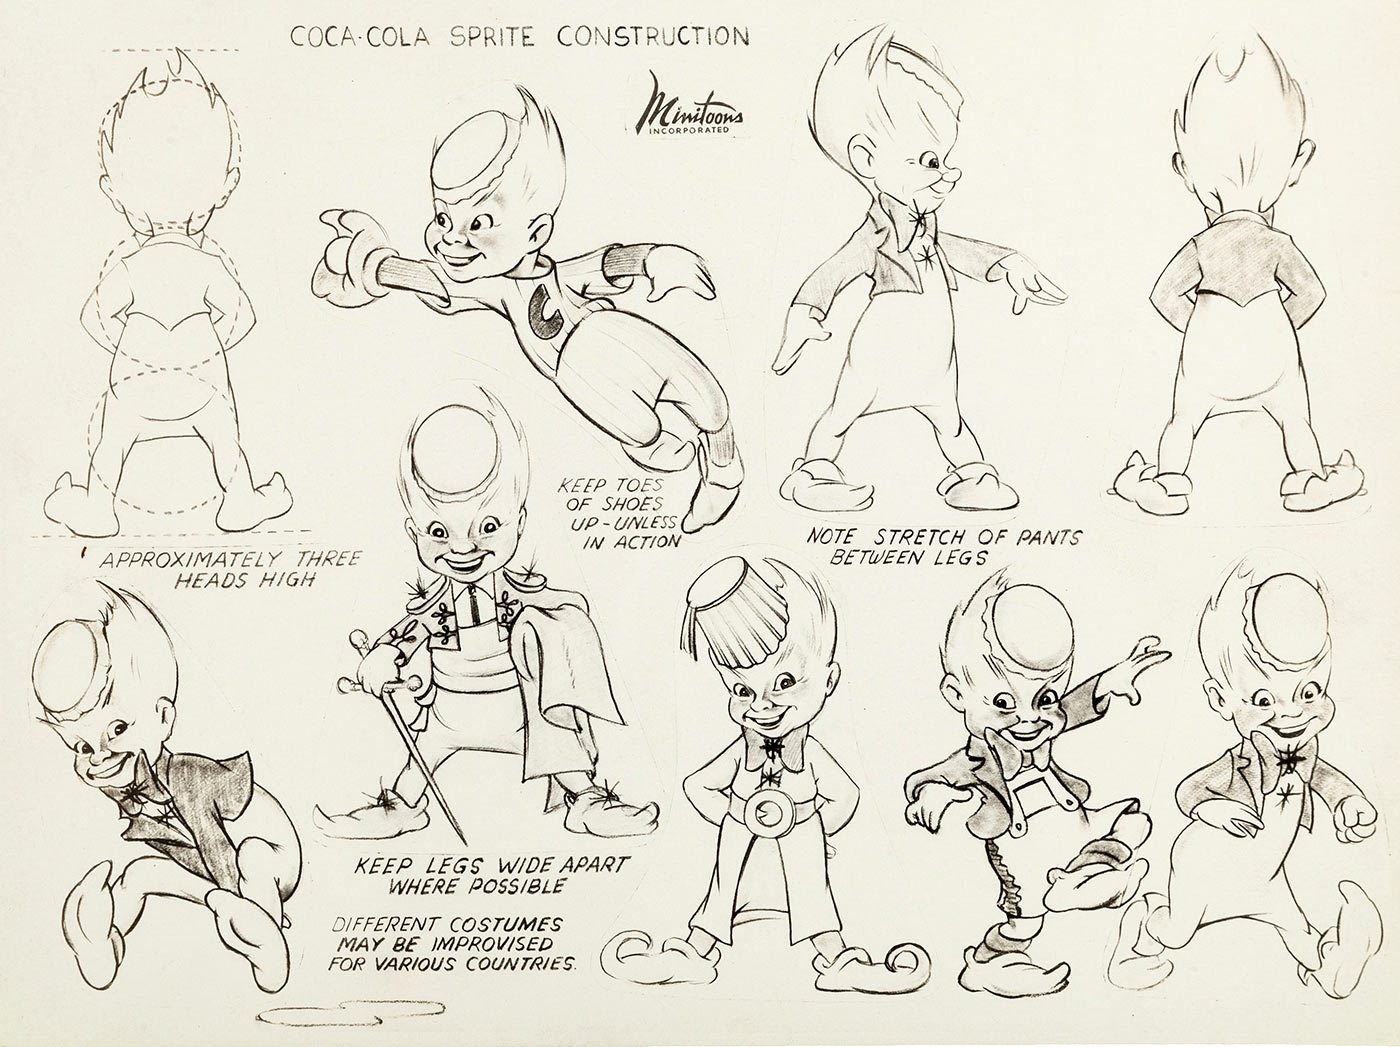 Model sheet for Coca-Cola project by Magro's studio Minitoons, ca. 1946.